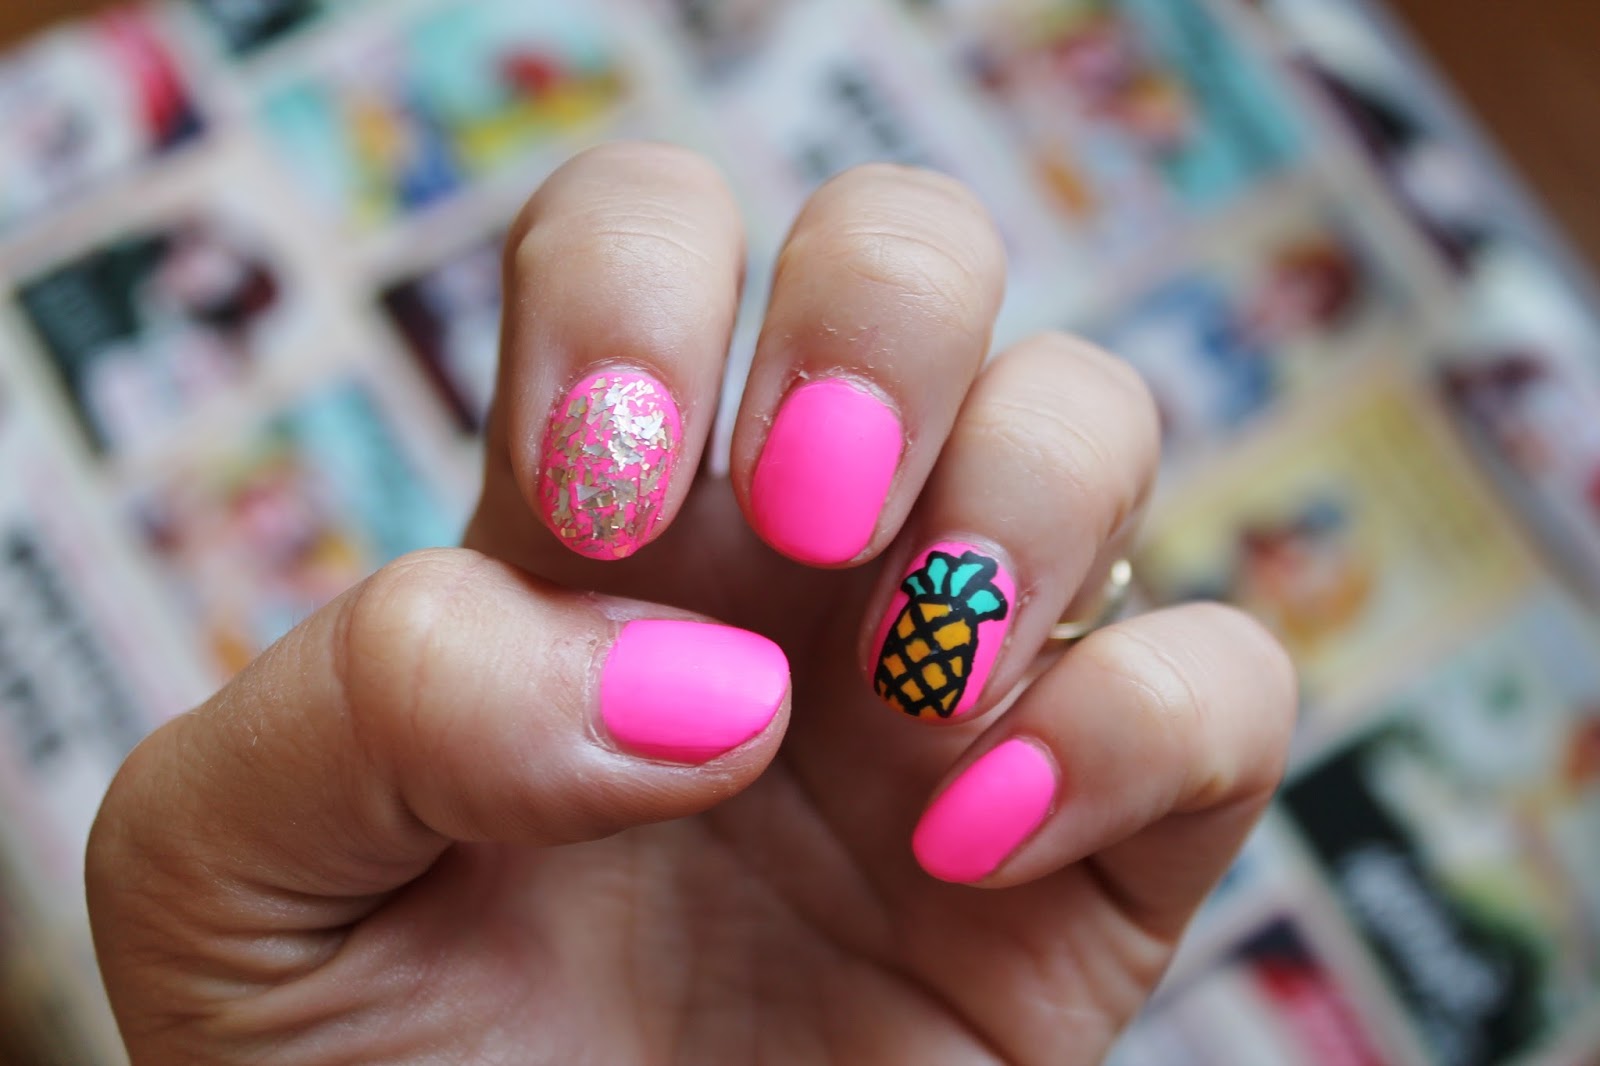 1. Pineapple Nail Art Stickers - 10 Sheets - wide 4